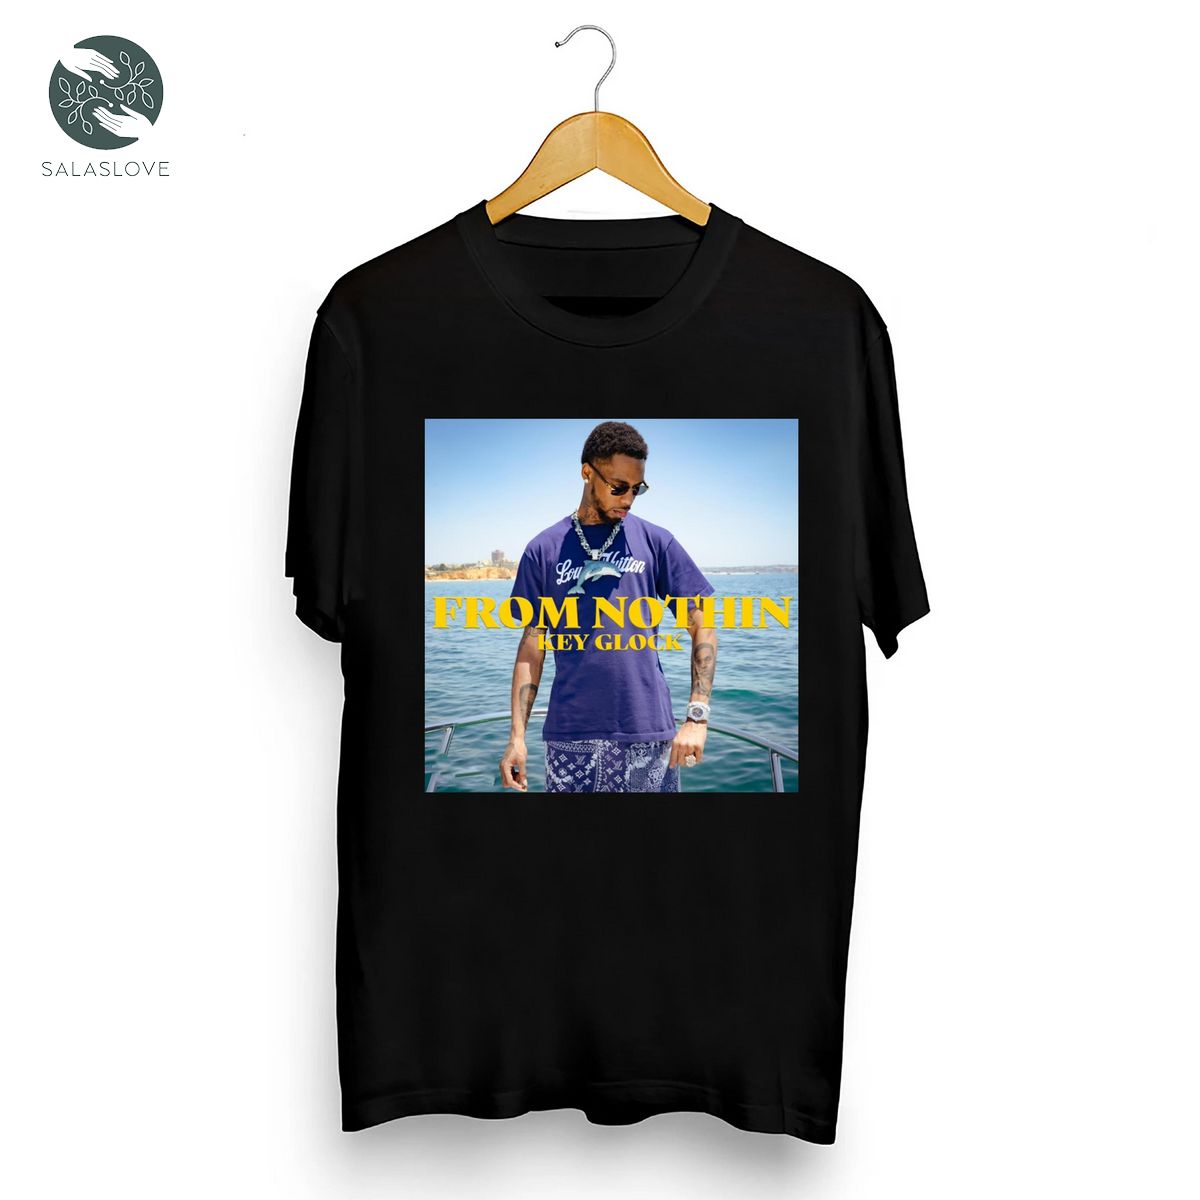 From Nothing By Key Glock t-Shirt